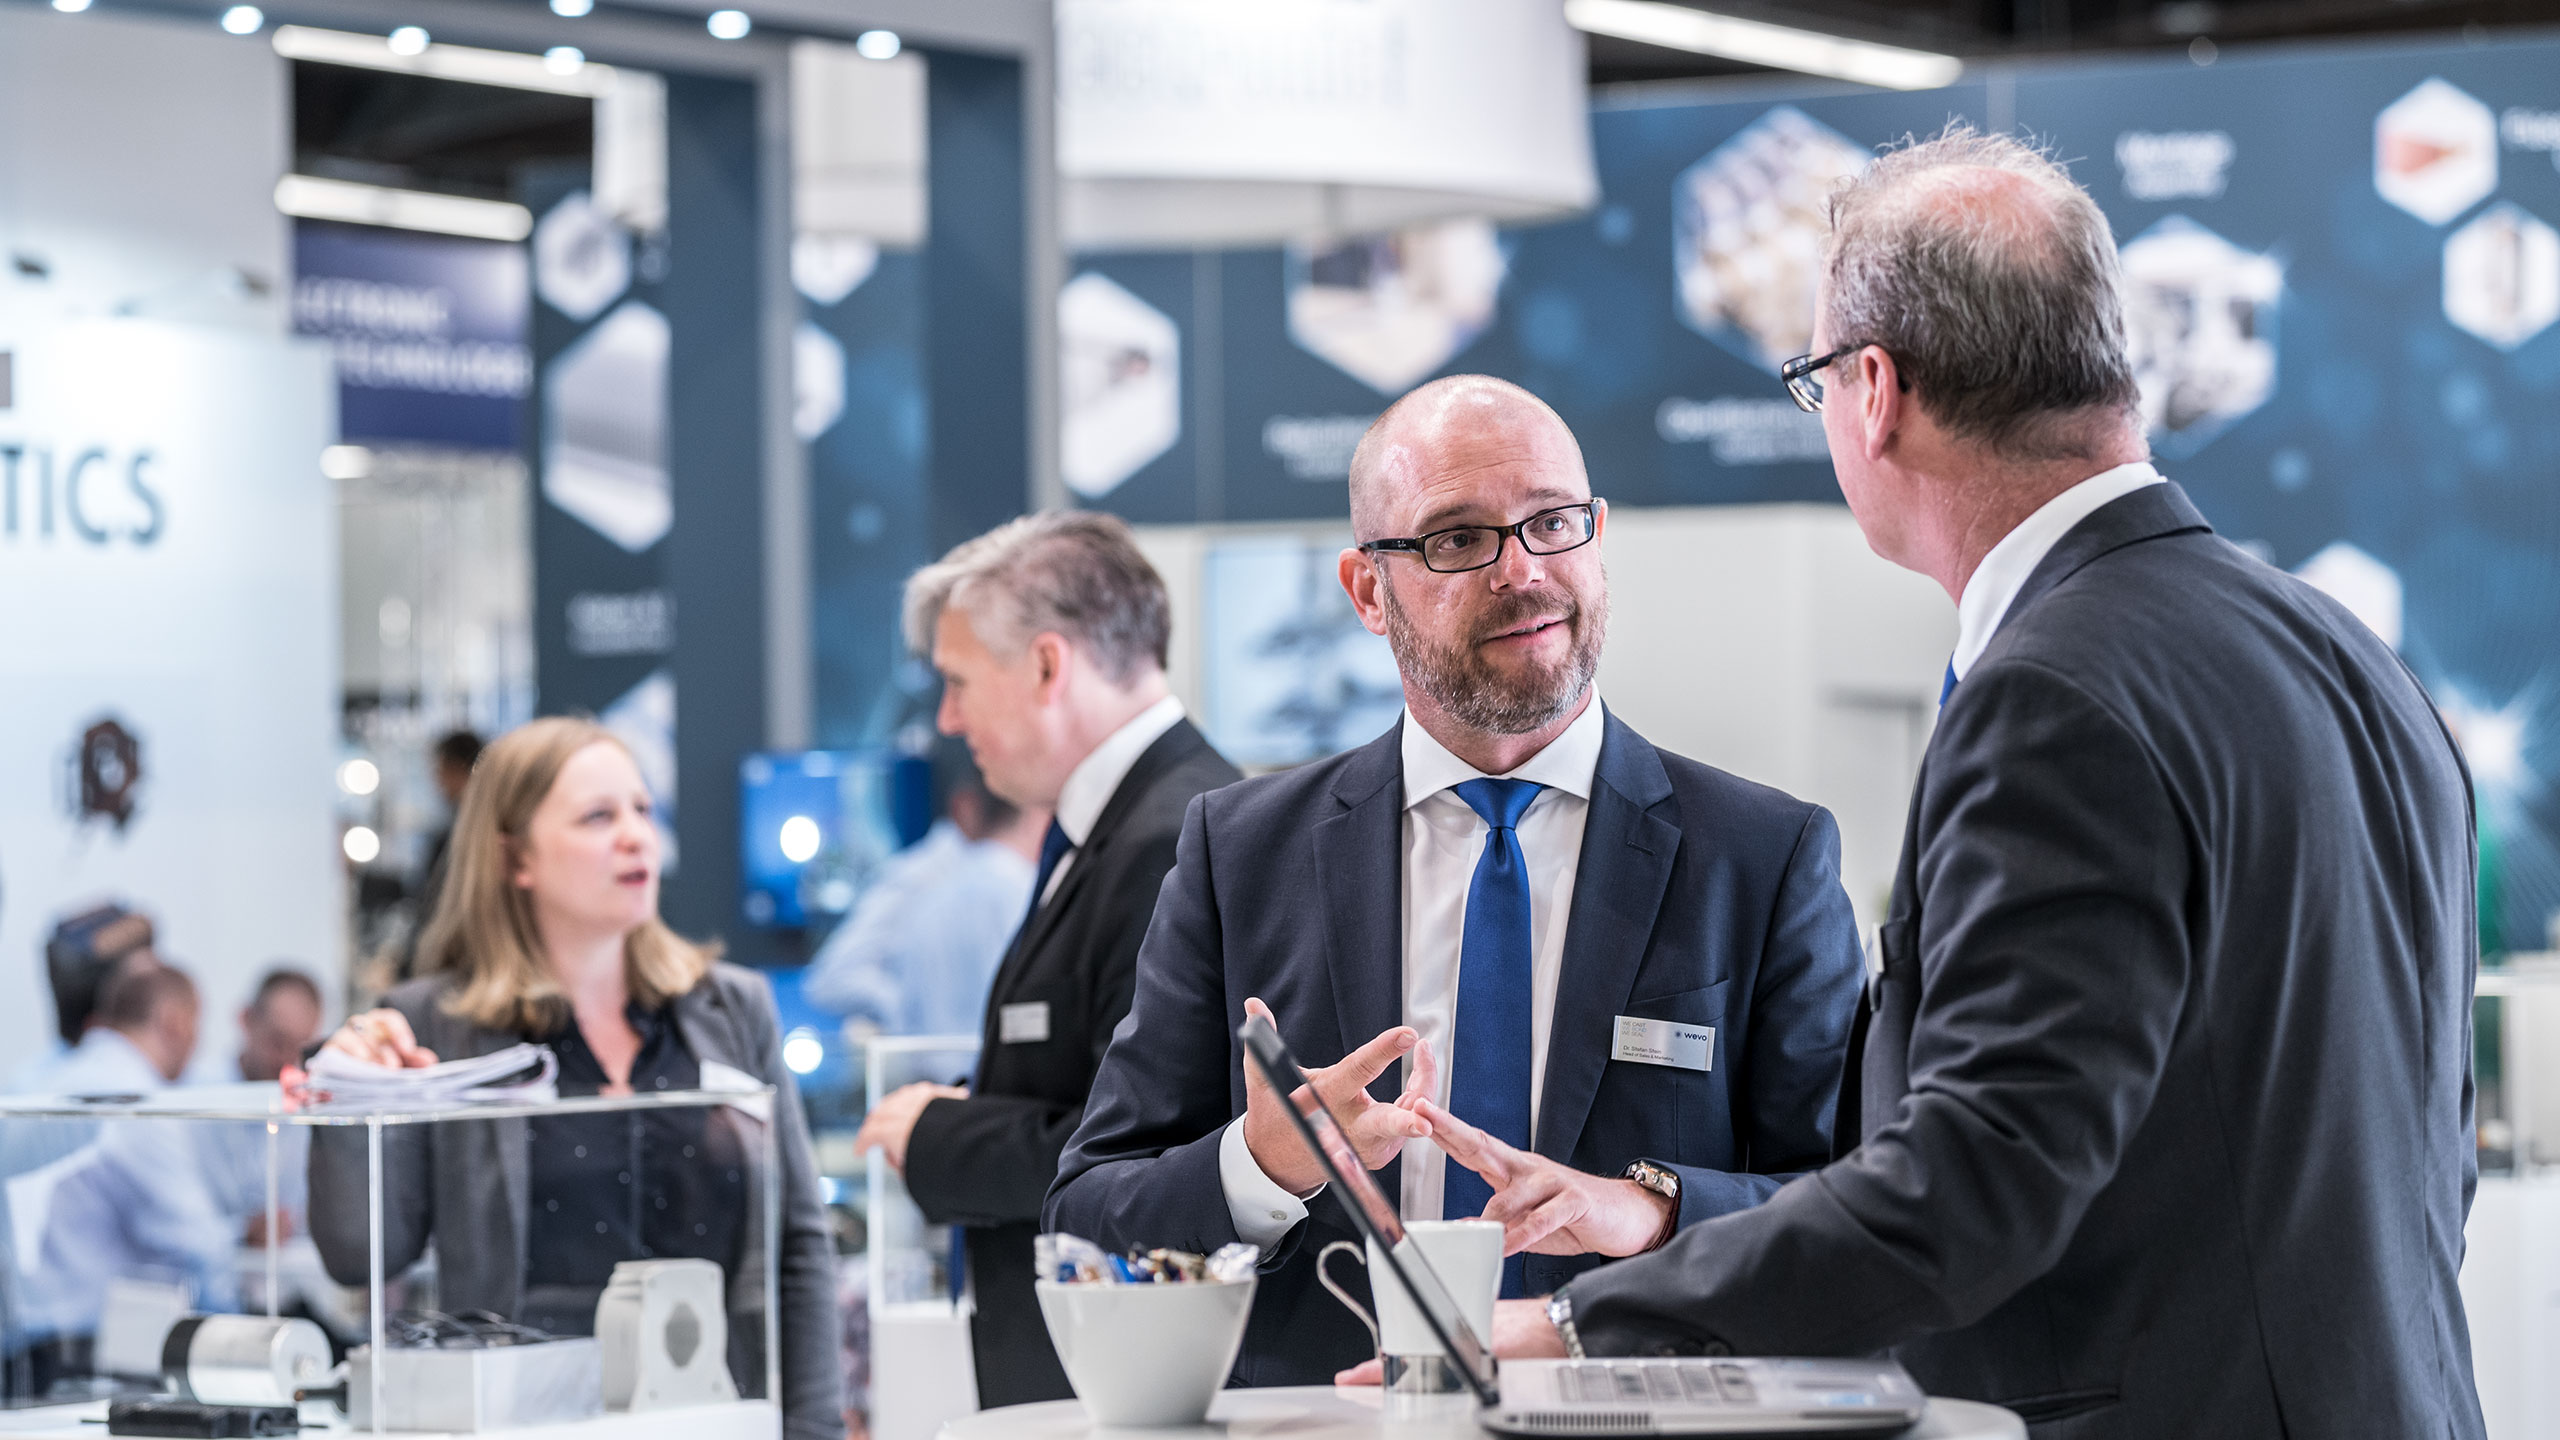 Become part of the industry highlight in Nuremberg